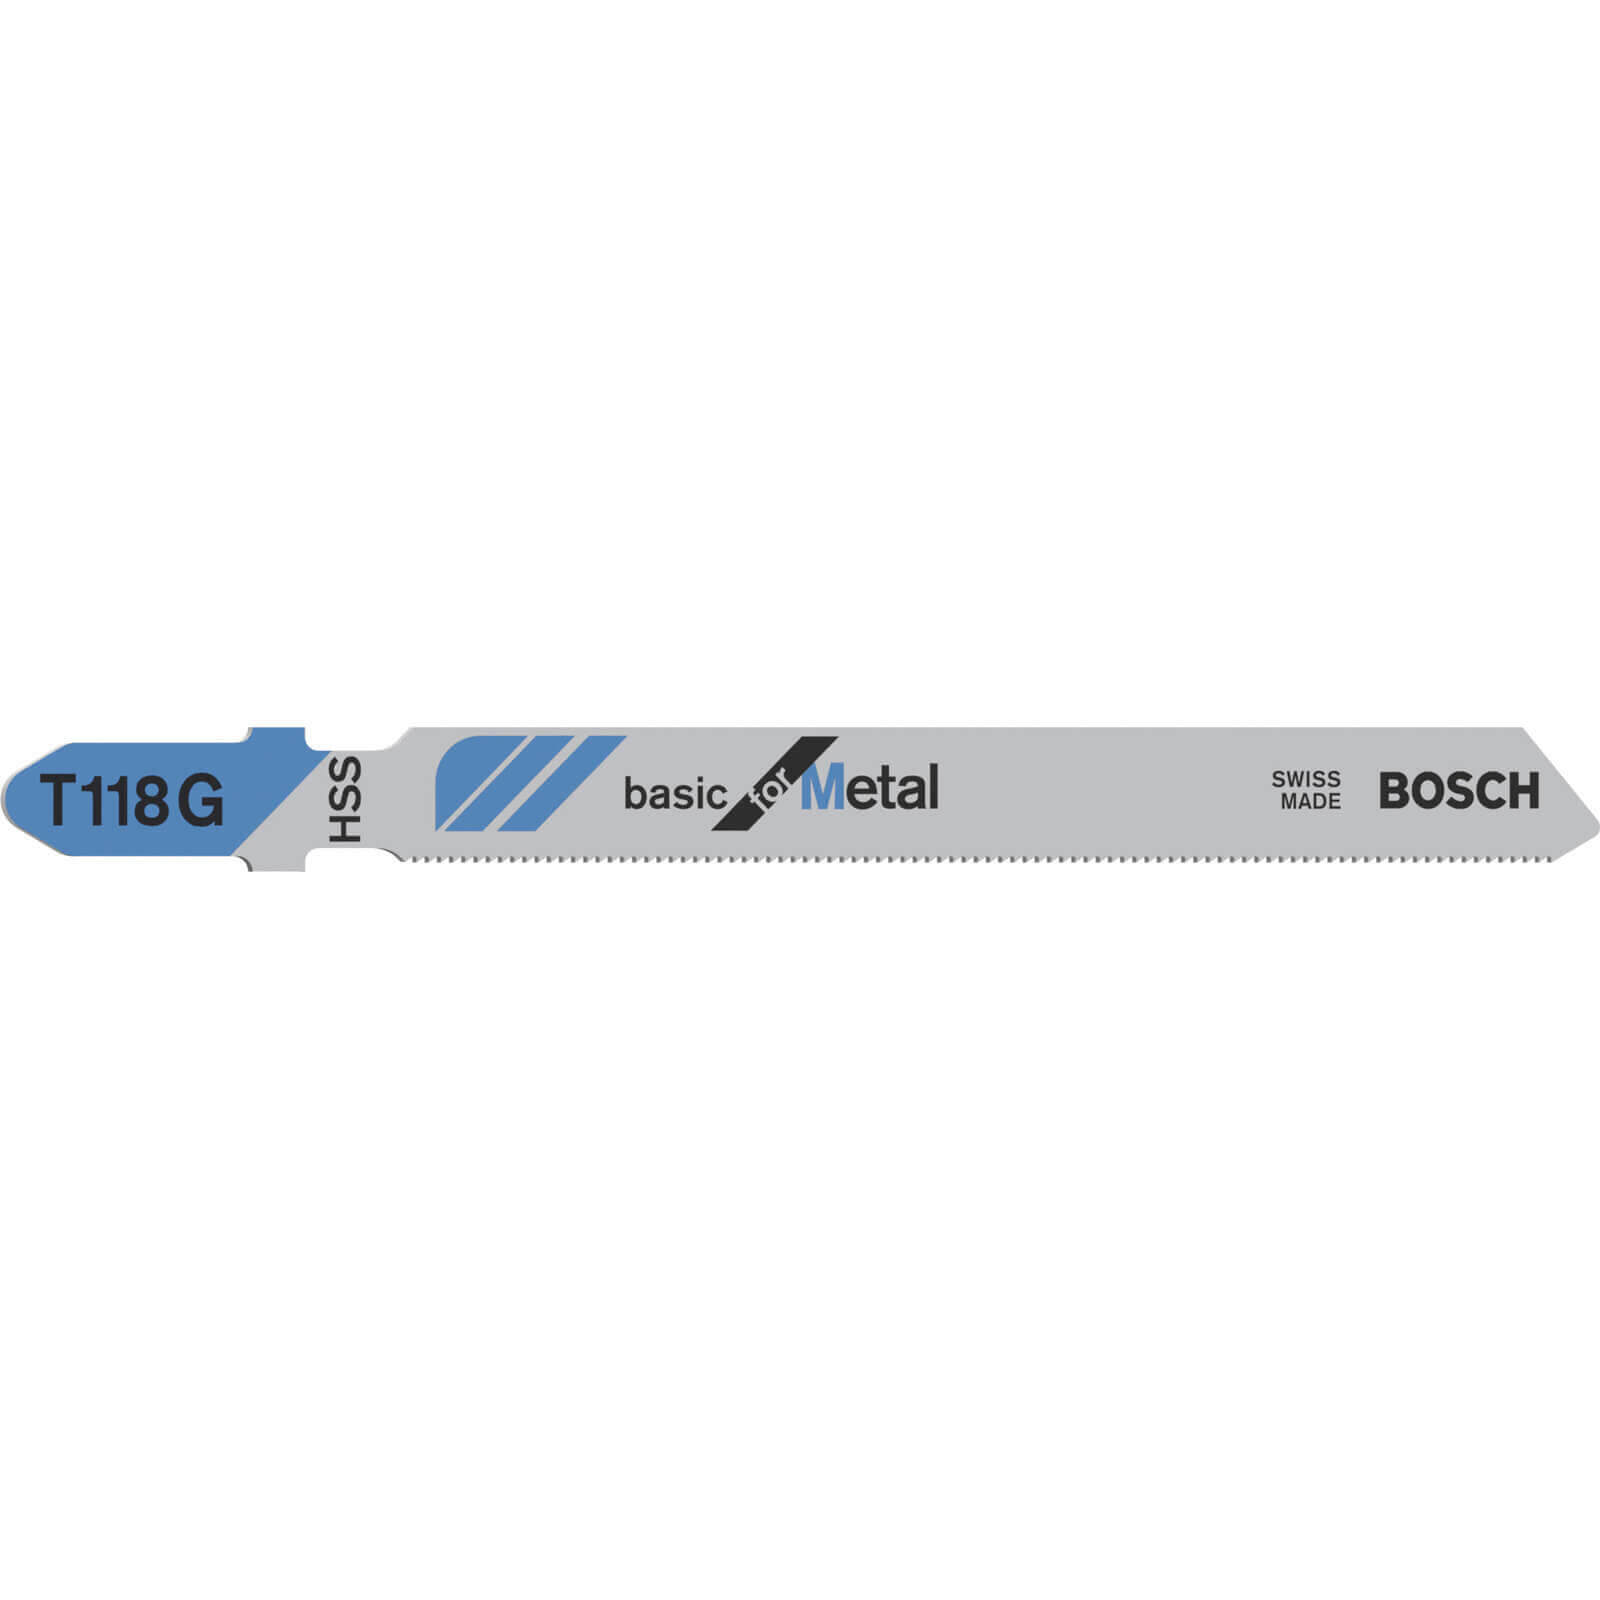 Image of Bosch T118 G Metal Cutting Jigsaw Blades Pack of 5